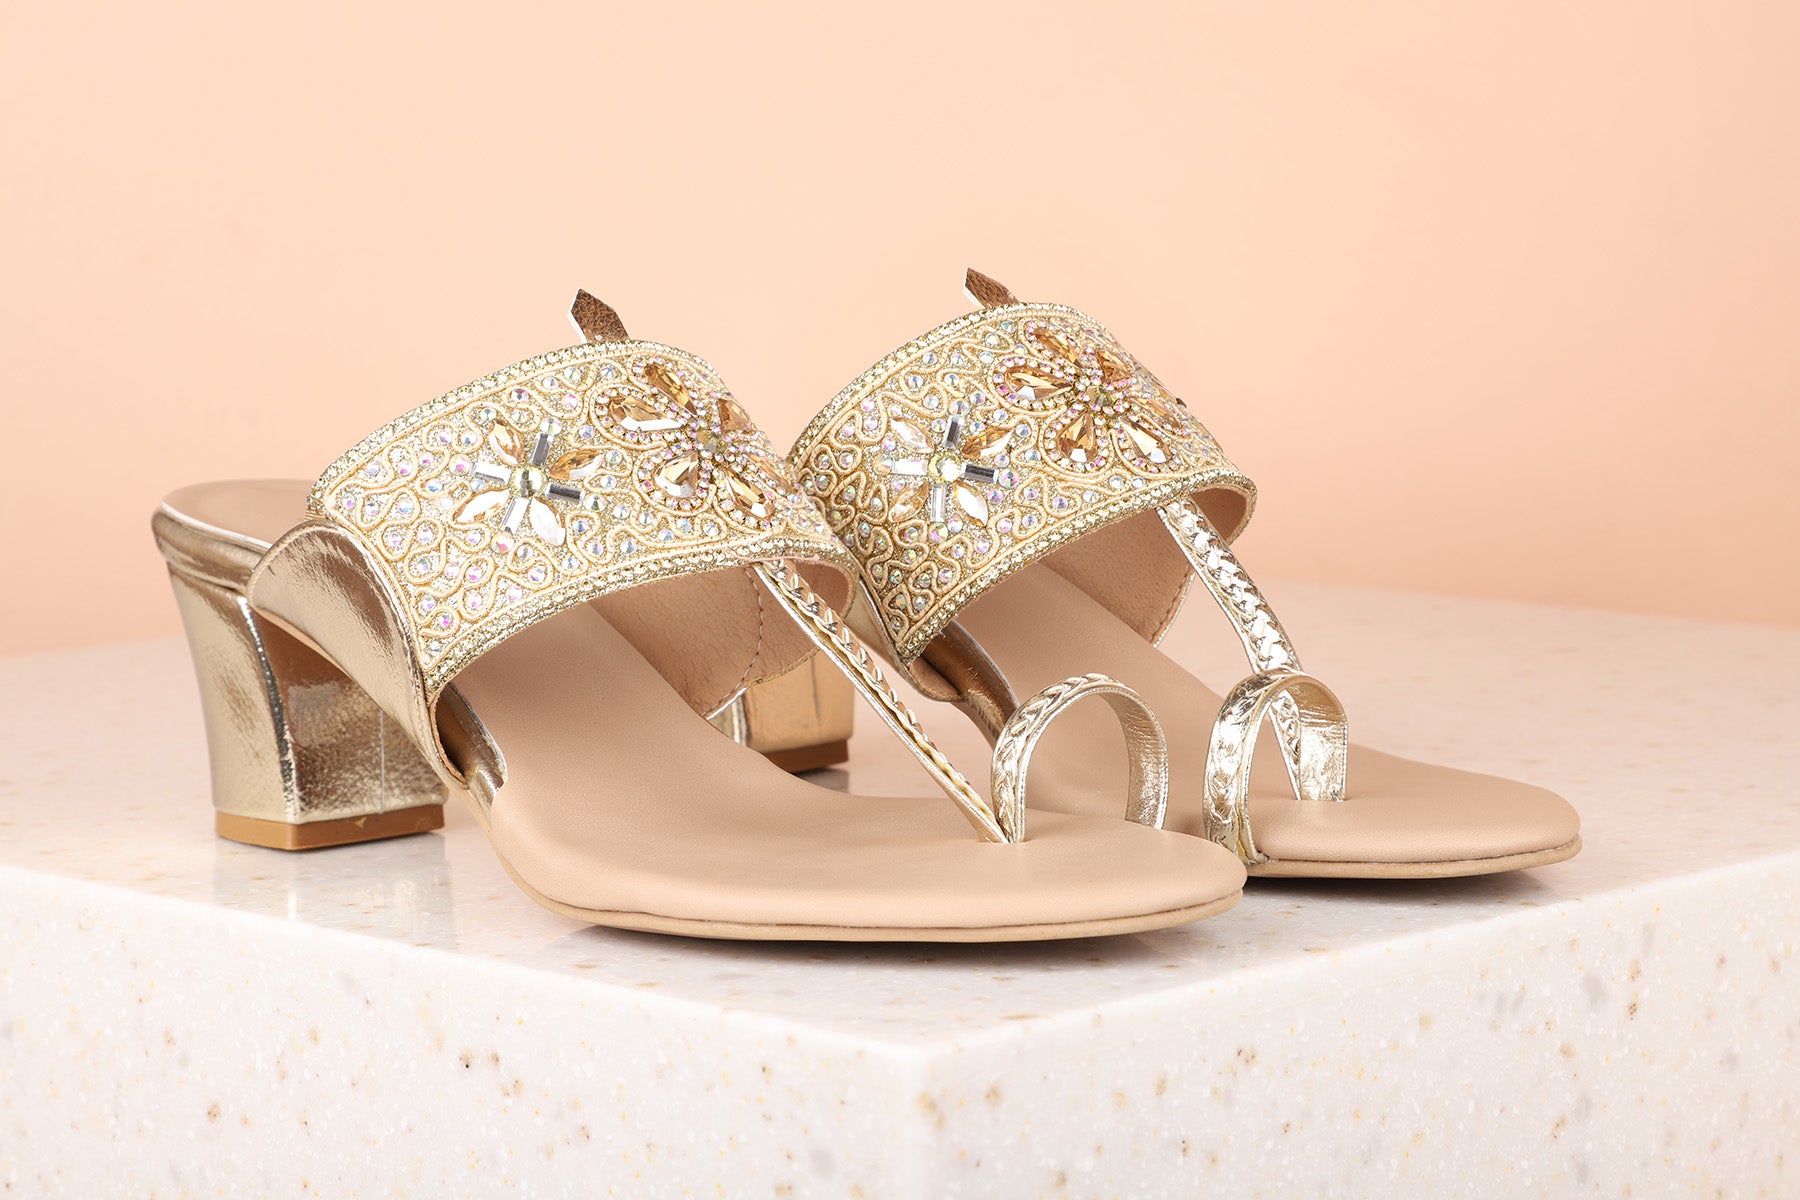 Silver Rock Glitter Block Heel with Ankle Strap | Heels, Prom shoes  sparkly, Silver heels prom